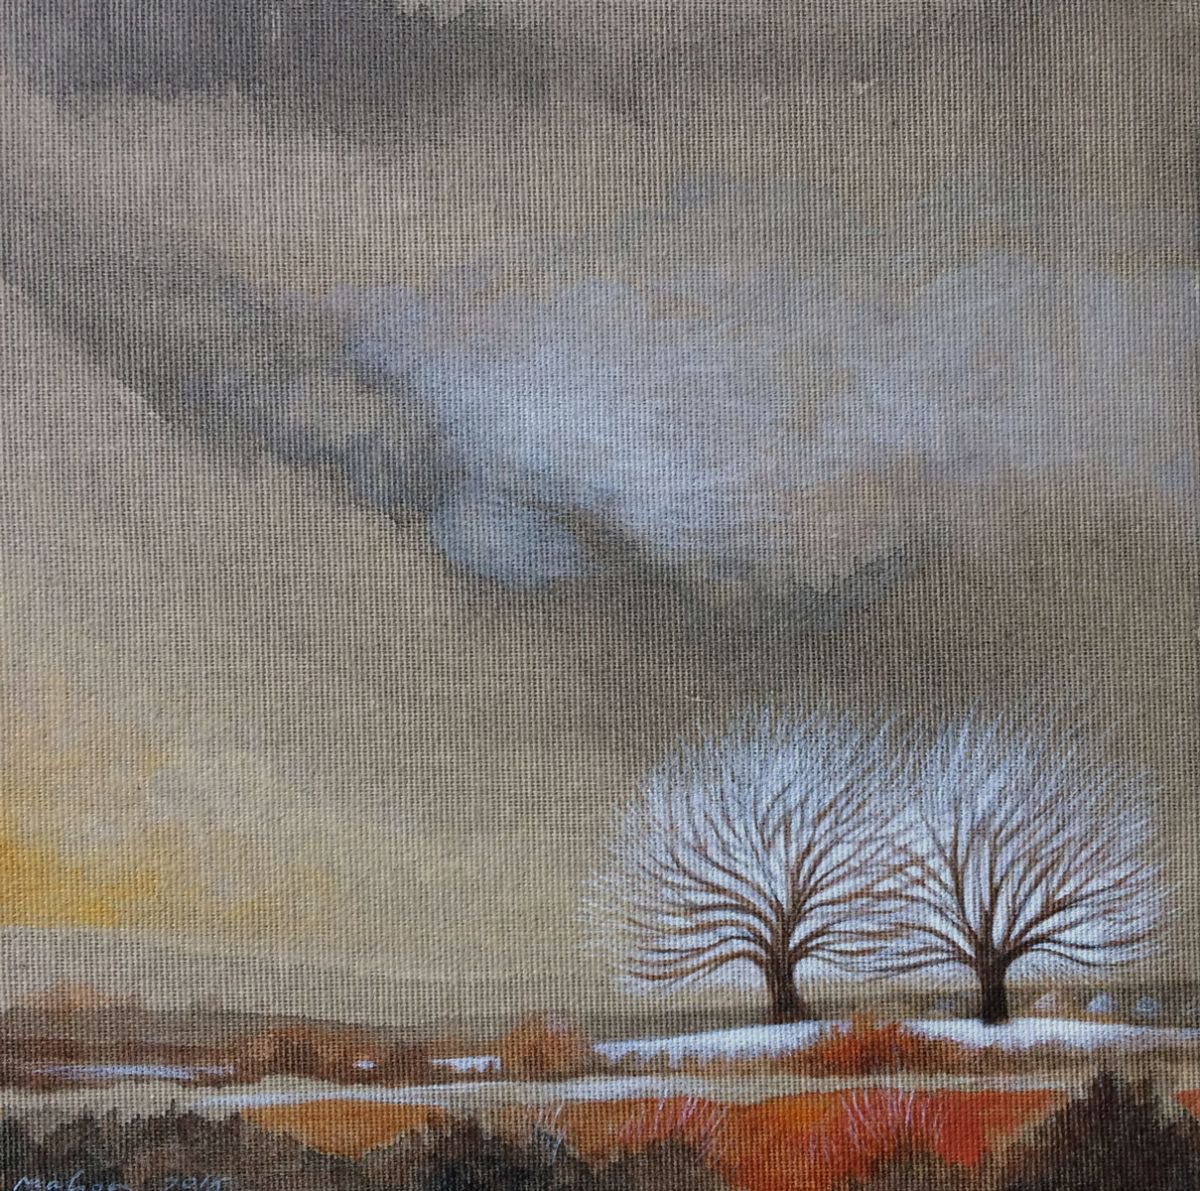 Together (two trees) by Phyllis Mahon